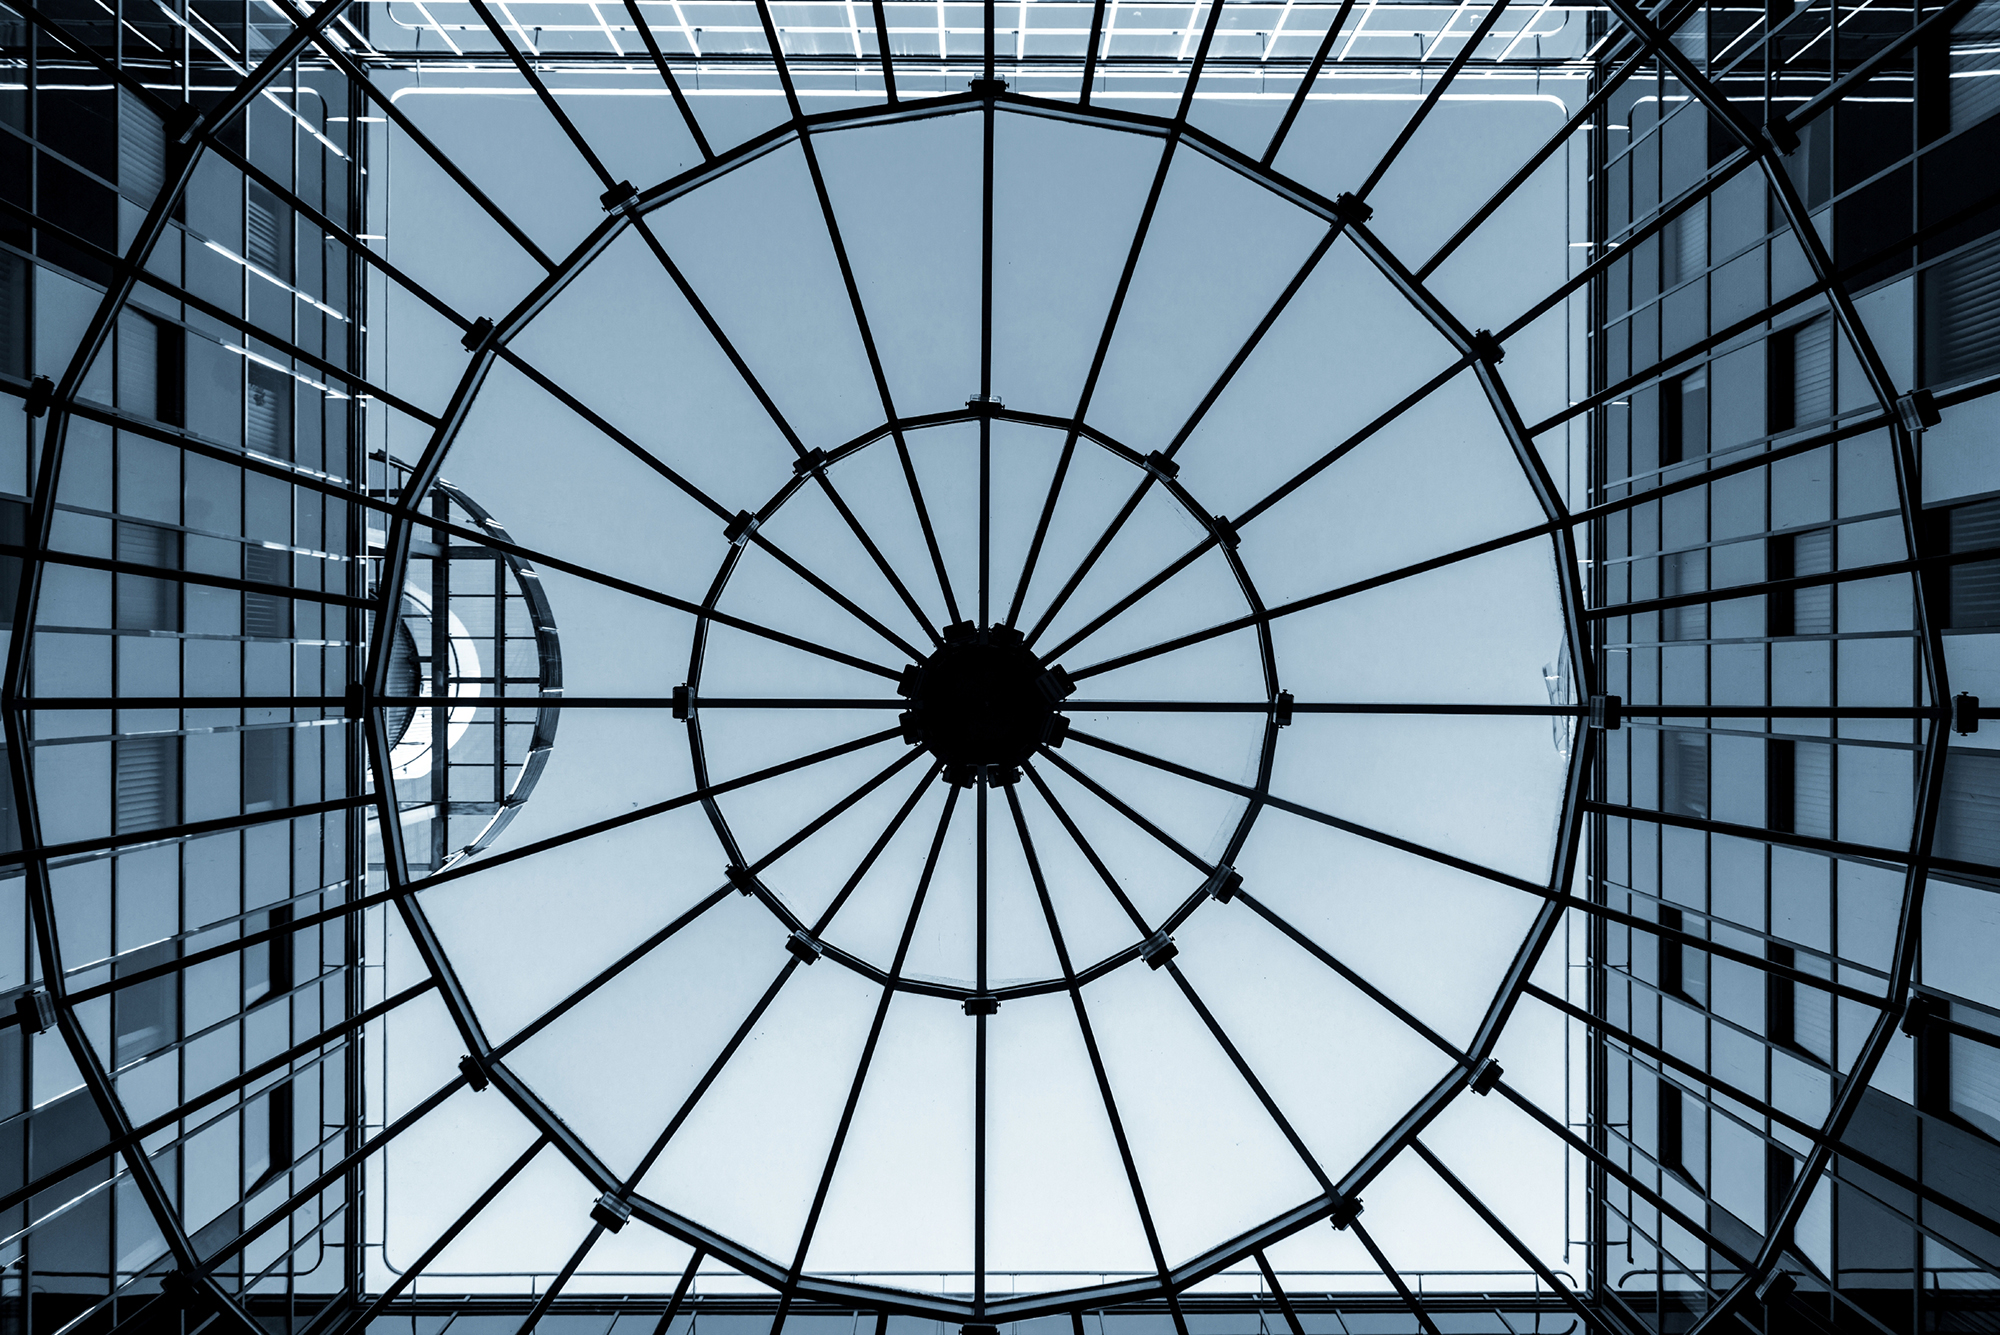 Continuous energy supply is essential for the flat glass industry